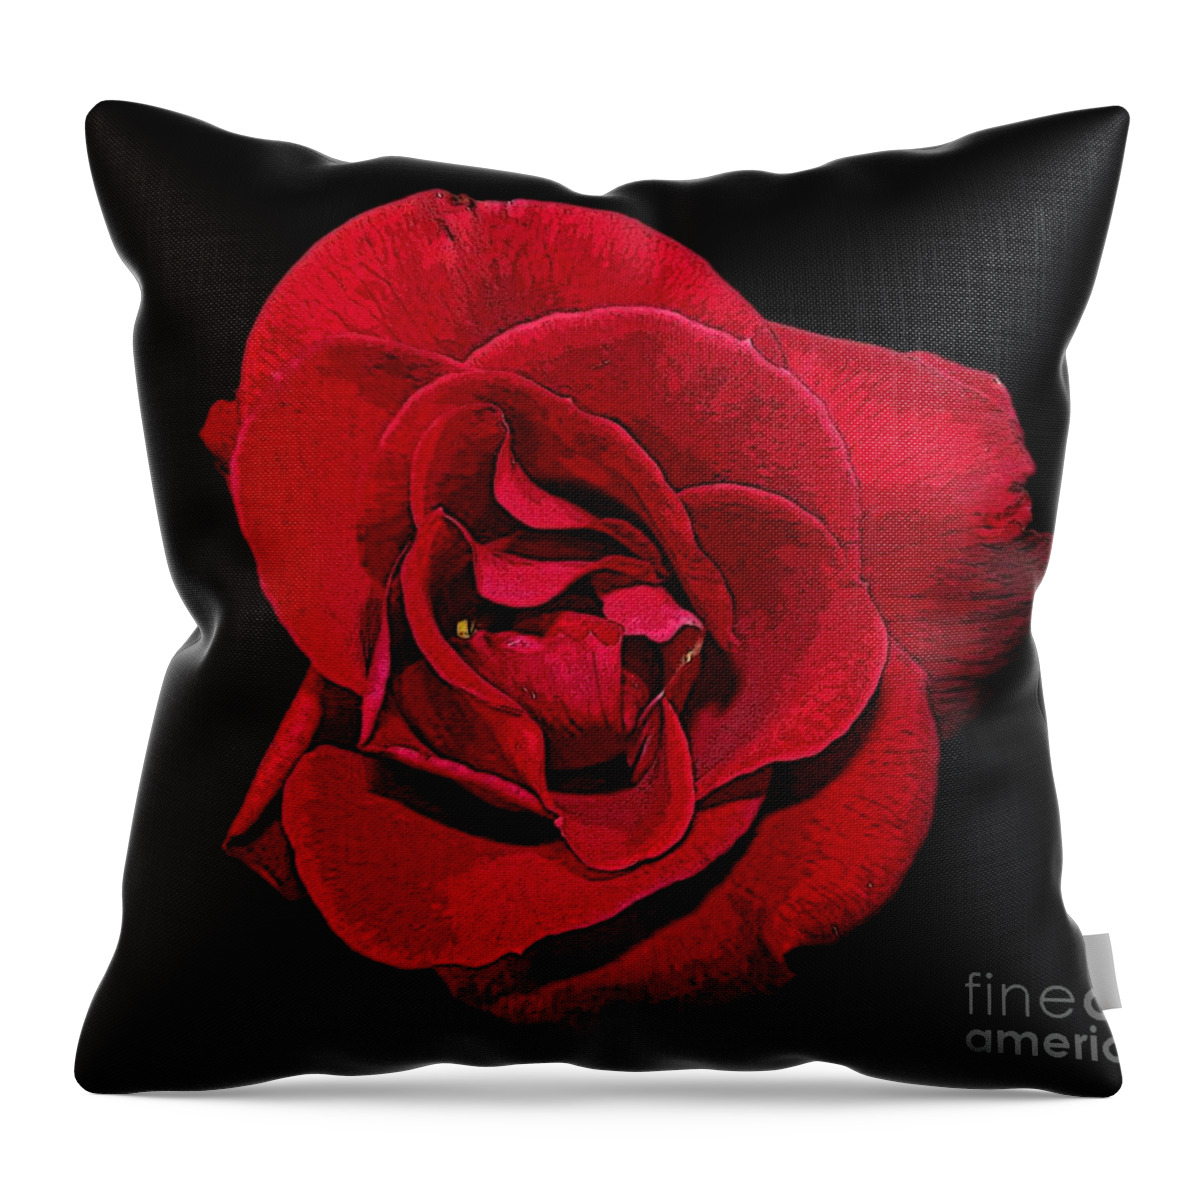 Poster Edge Effect Throw Pillow featuring the photograph Red Rose with Poster Edges Effect by Rose Santuci-Sofranko